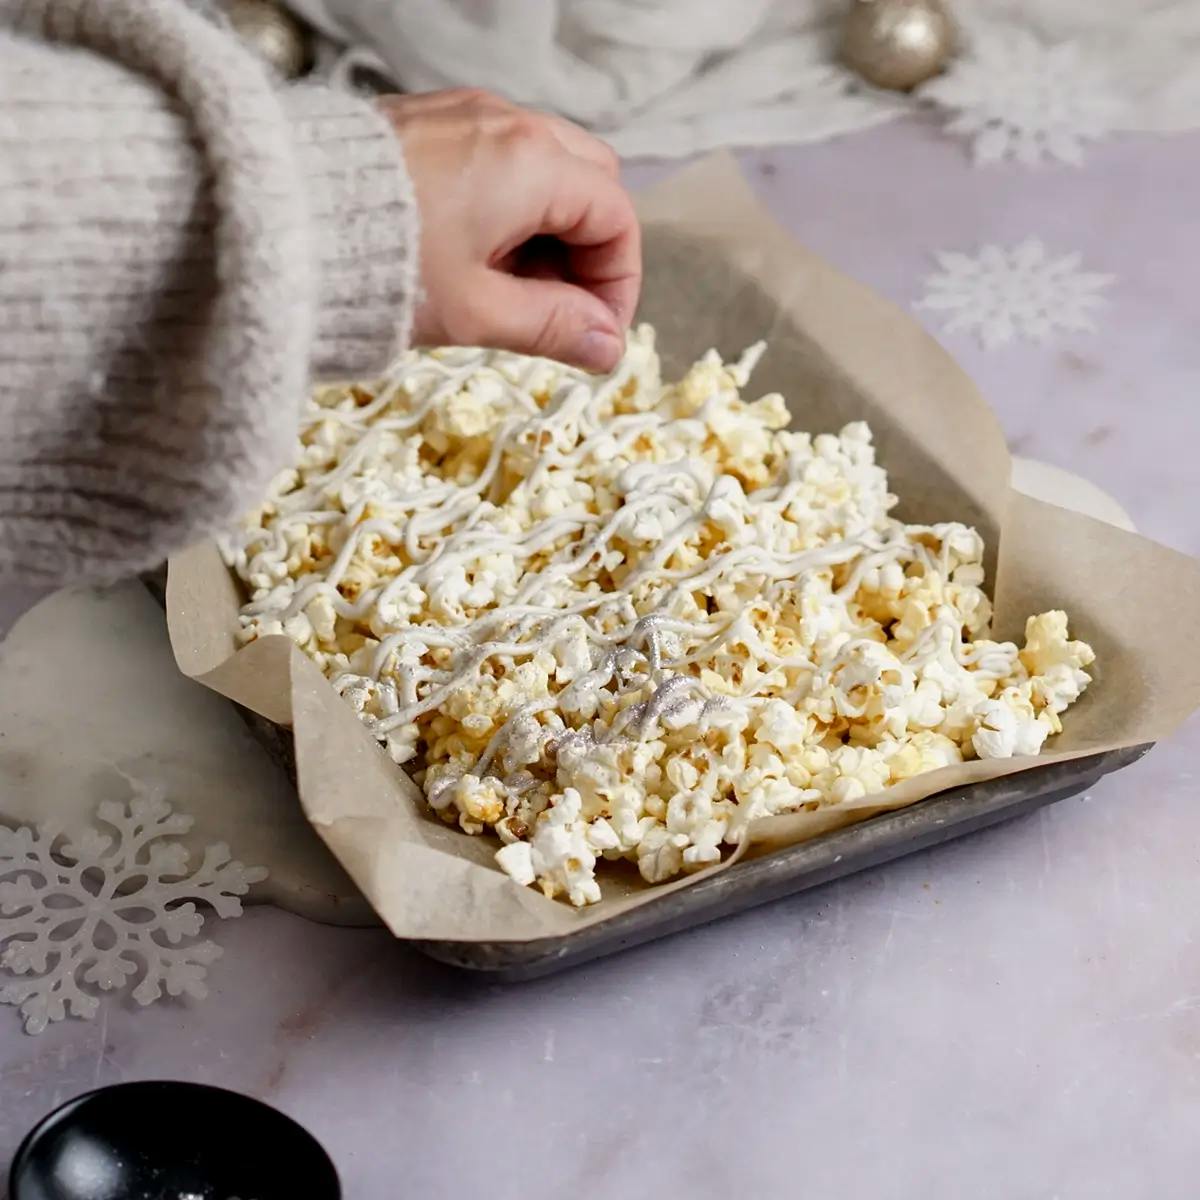 Christmas popcorn on a baking tray, drizzled with white chocolate. A hand is sprinkling edible silver glitter over the popcorn.